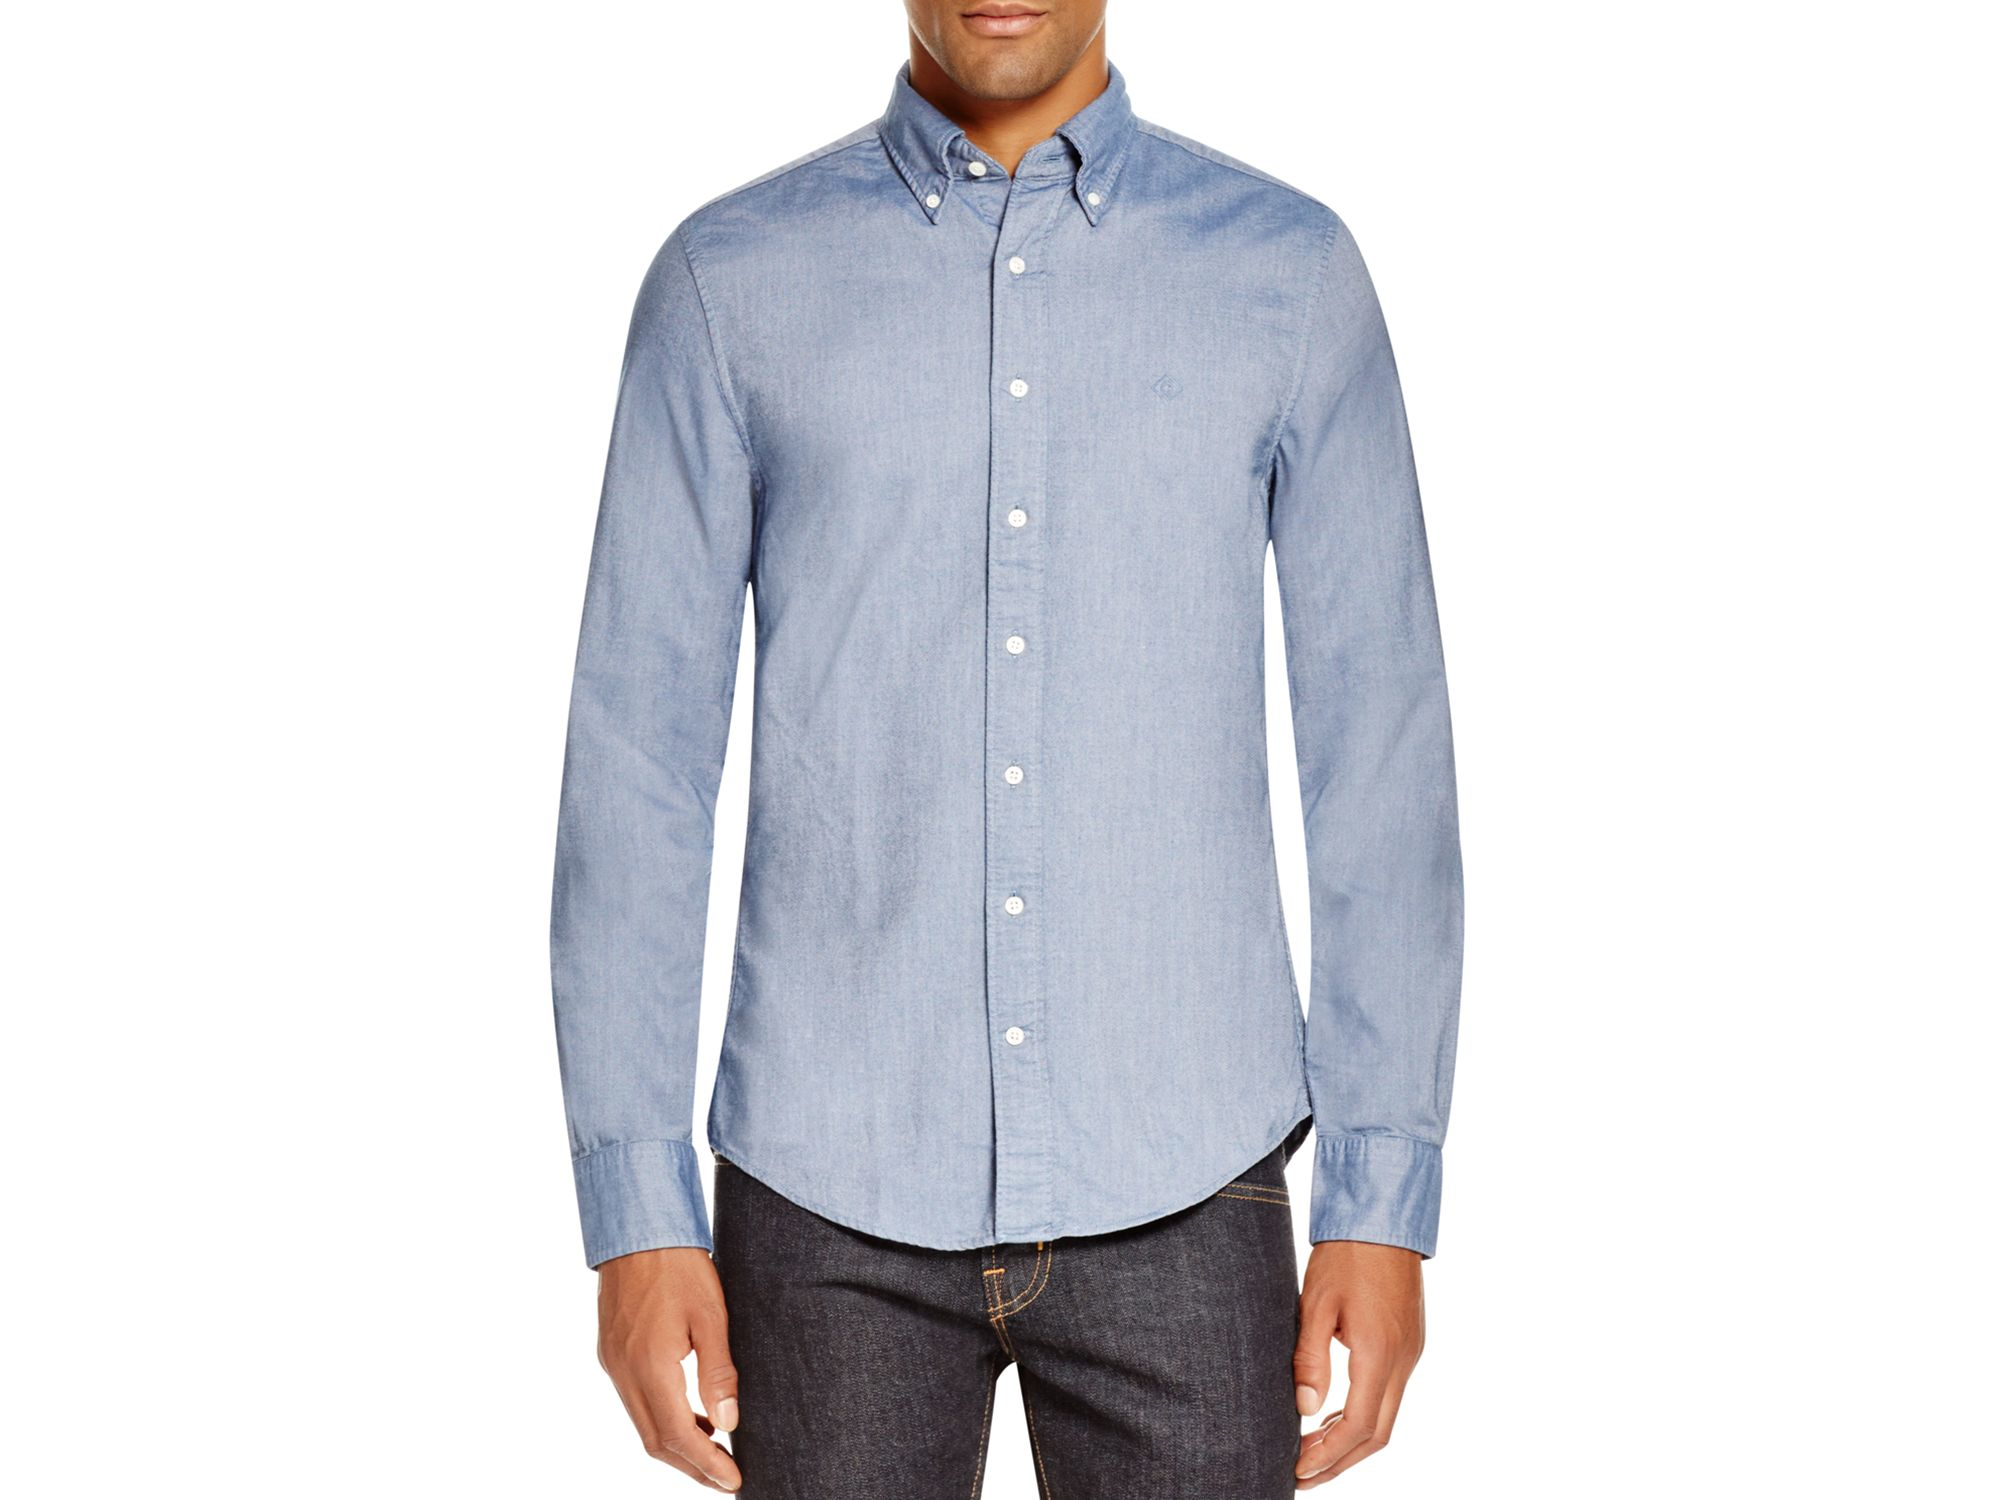 GANT Perfect Oxford Slim Fit Button-down Shirt in Blue for Men - Lyst